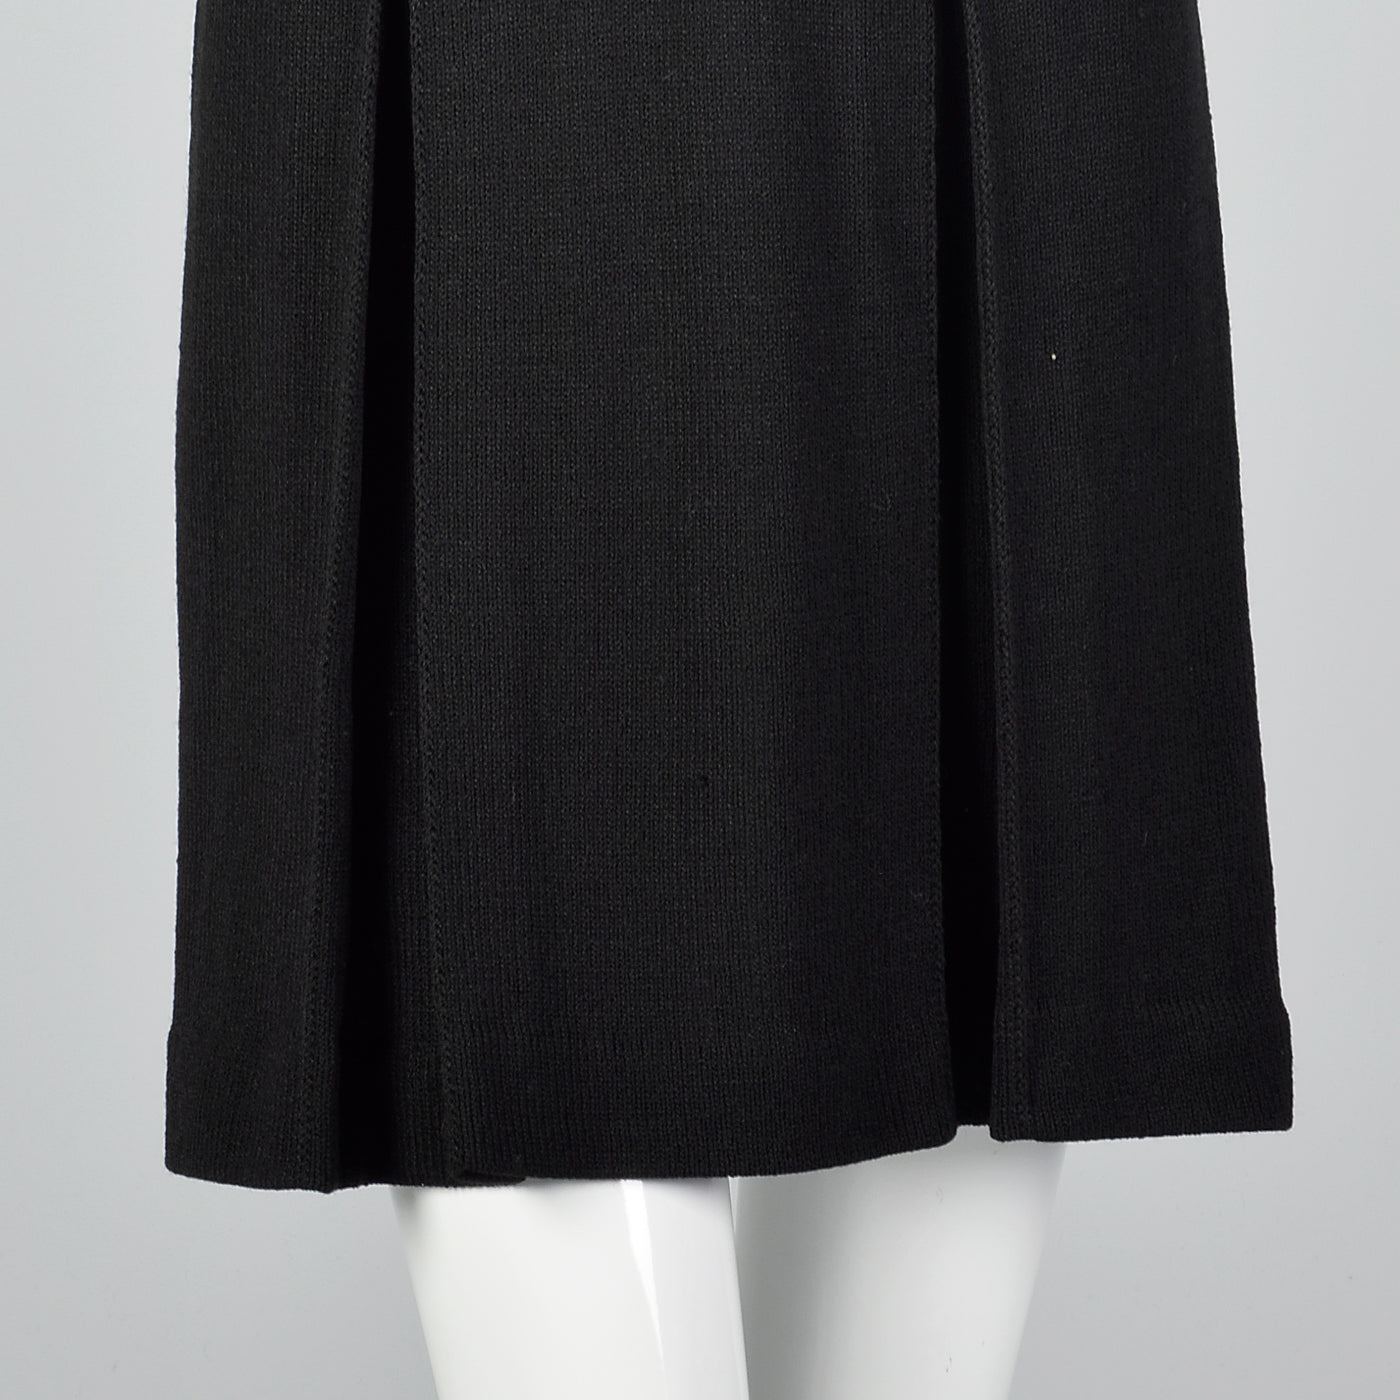 1980s Black Knit Dress with Gold Buttons